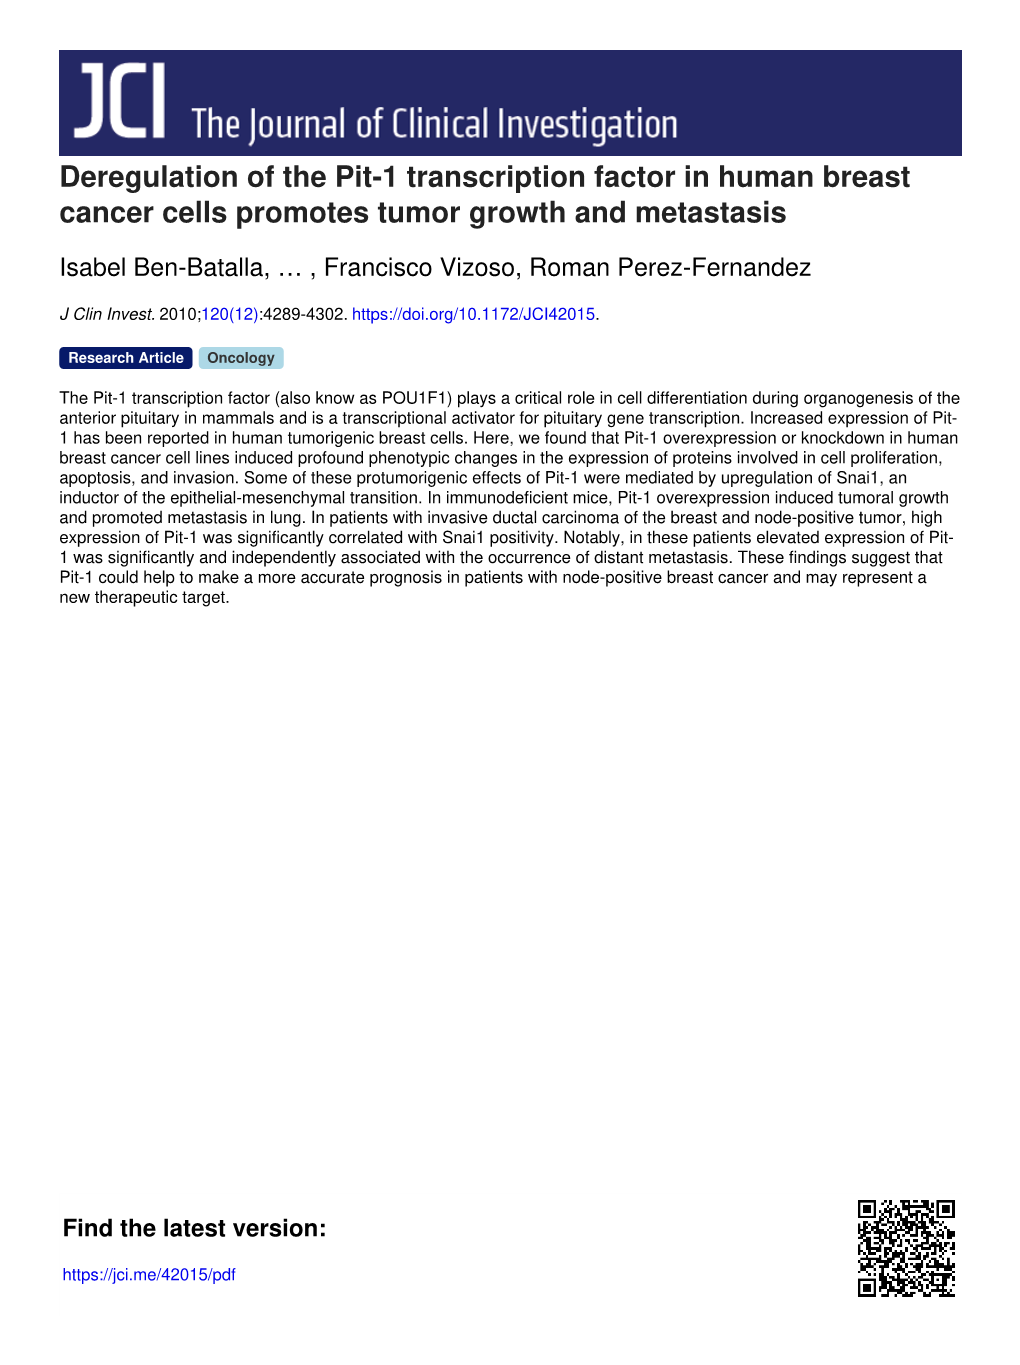 Deregulation of the Pit-1 Transcription Factor in Human Breast Cancer Cells Promotes Tumor Growth and Metastasis